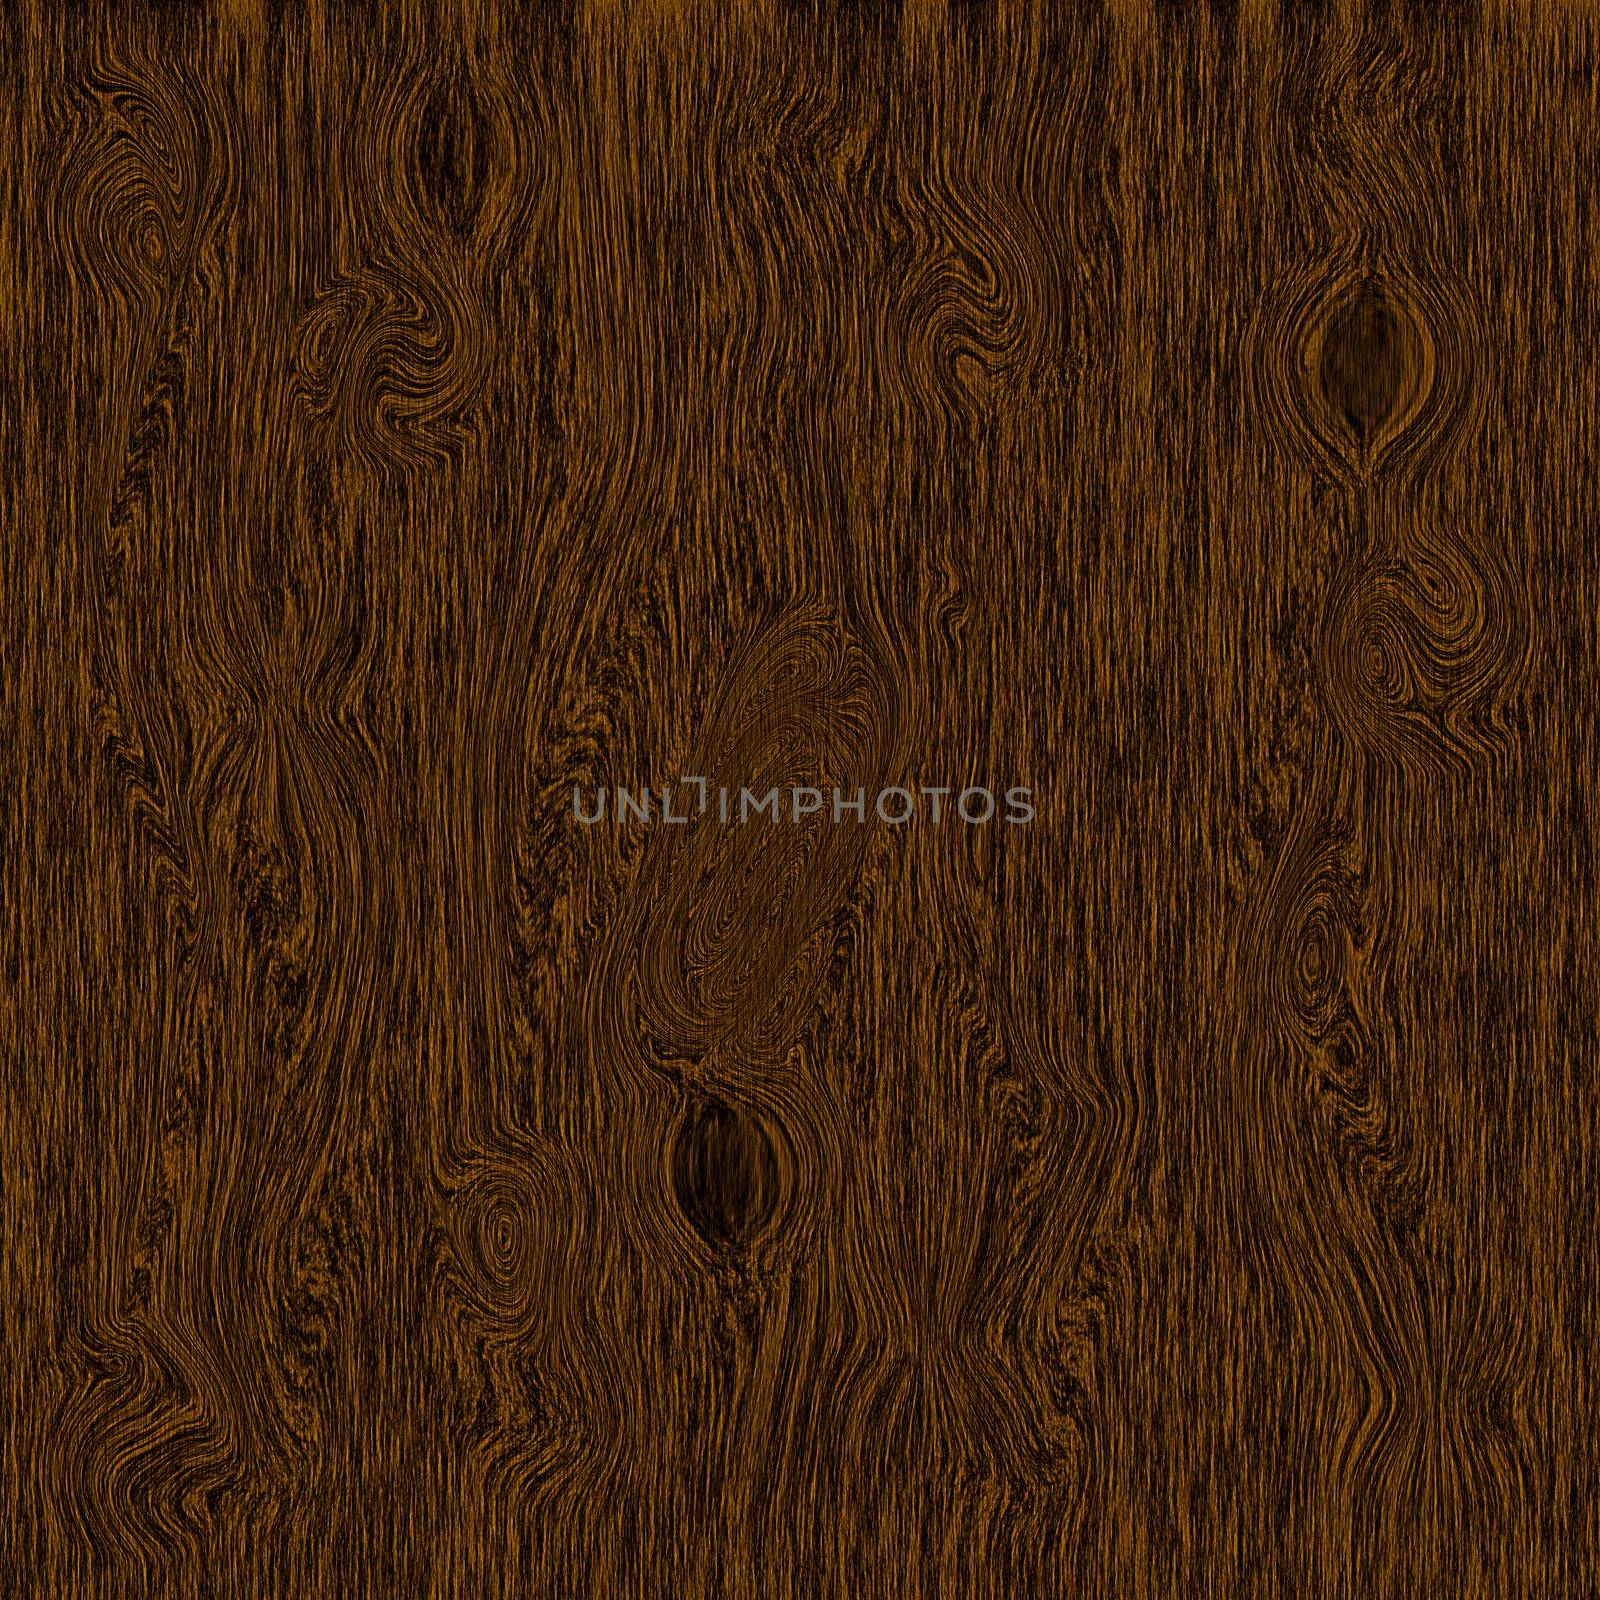 Design of Wood Grain Background Wall by Photoshop by kobfujar